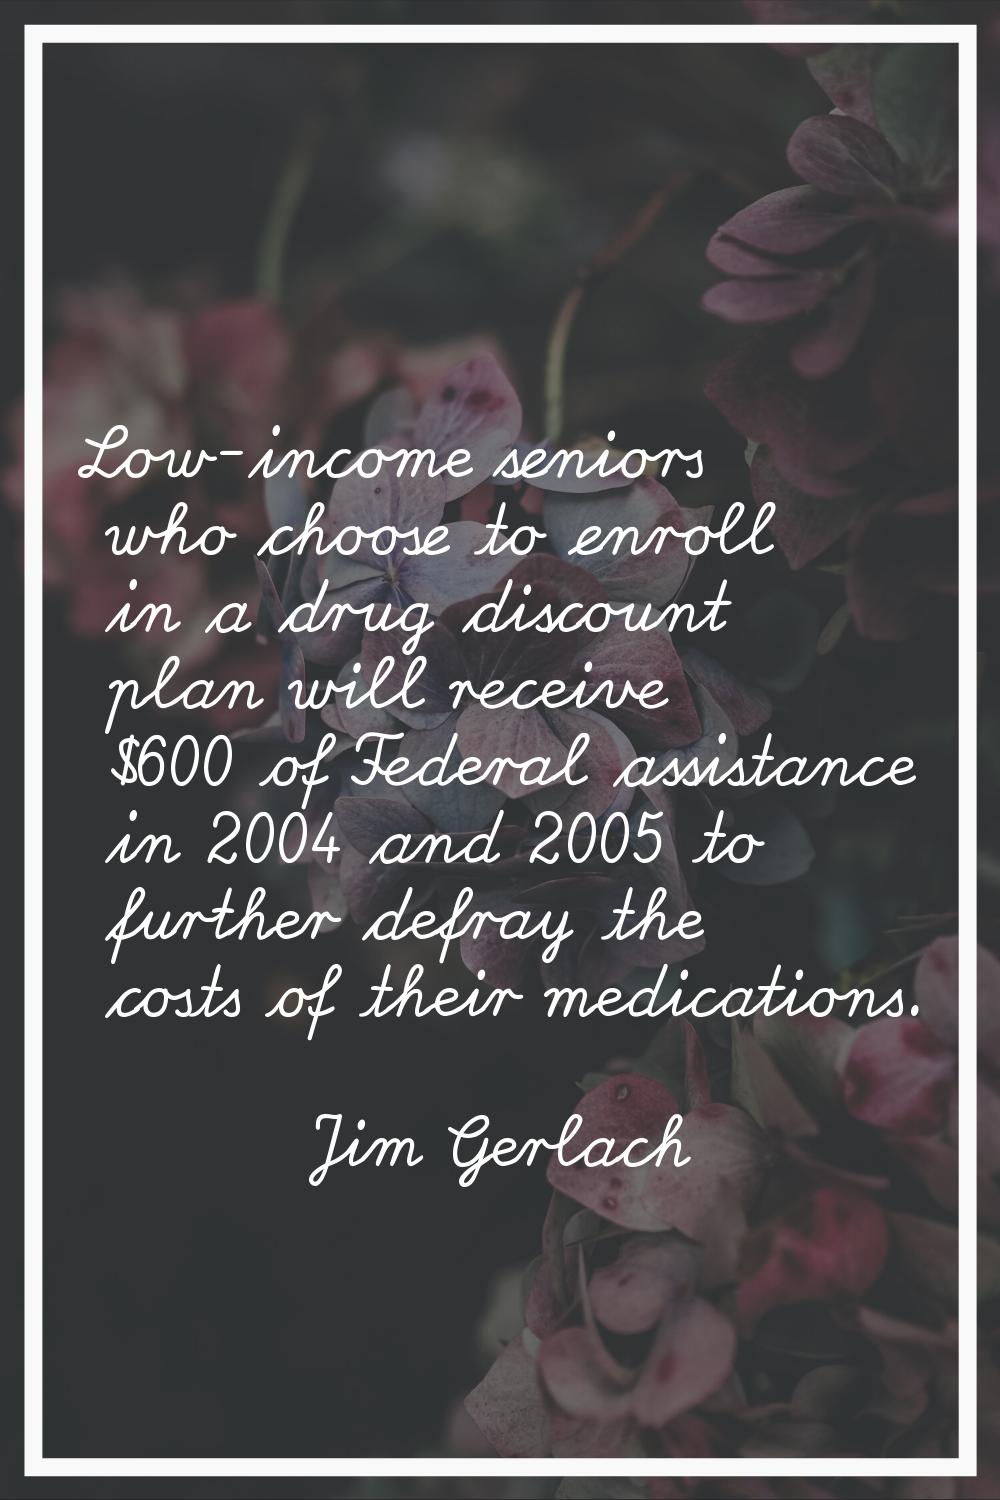 Low-income seniors who choose to enroll in a drug discount plan will receive $600 of Federal assist